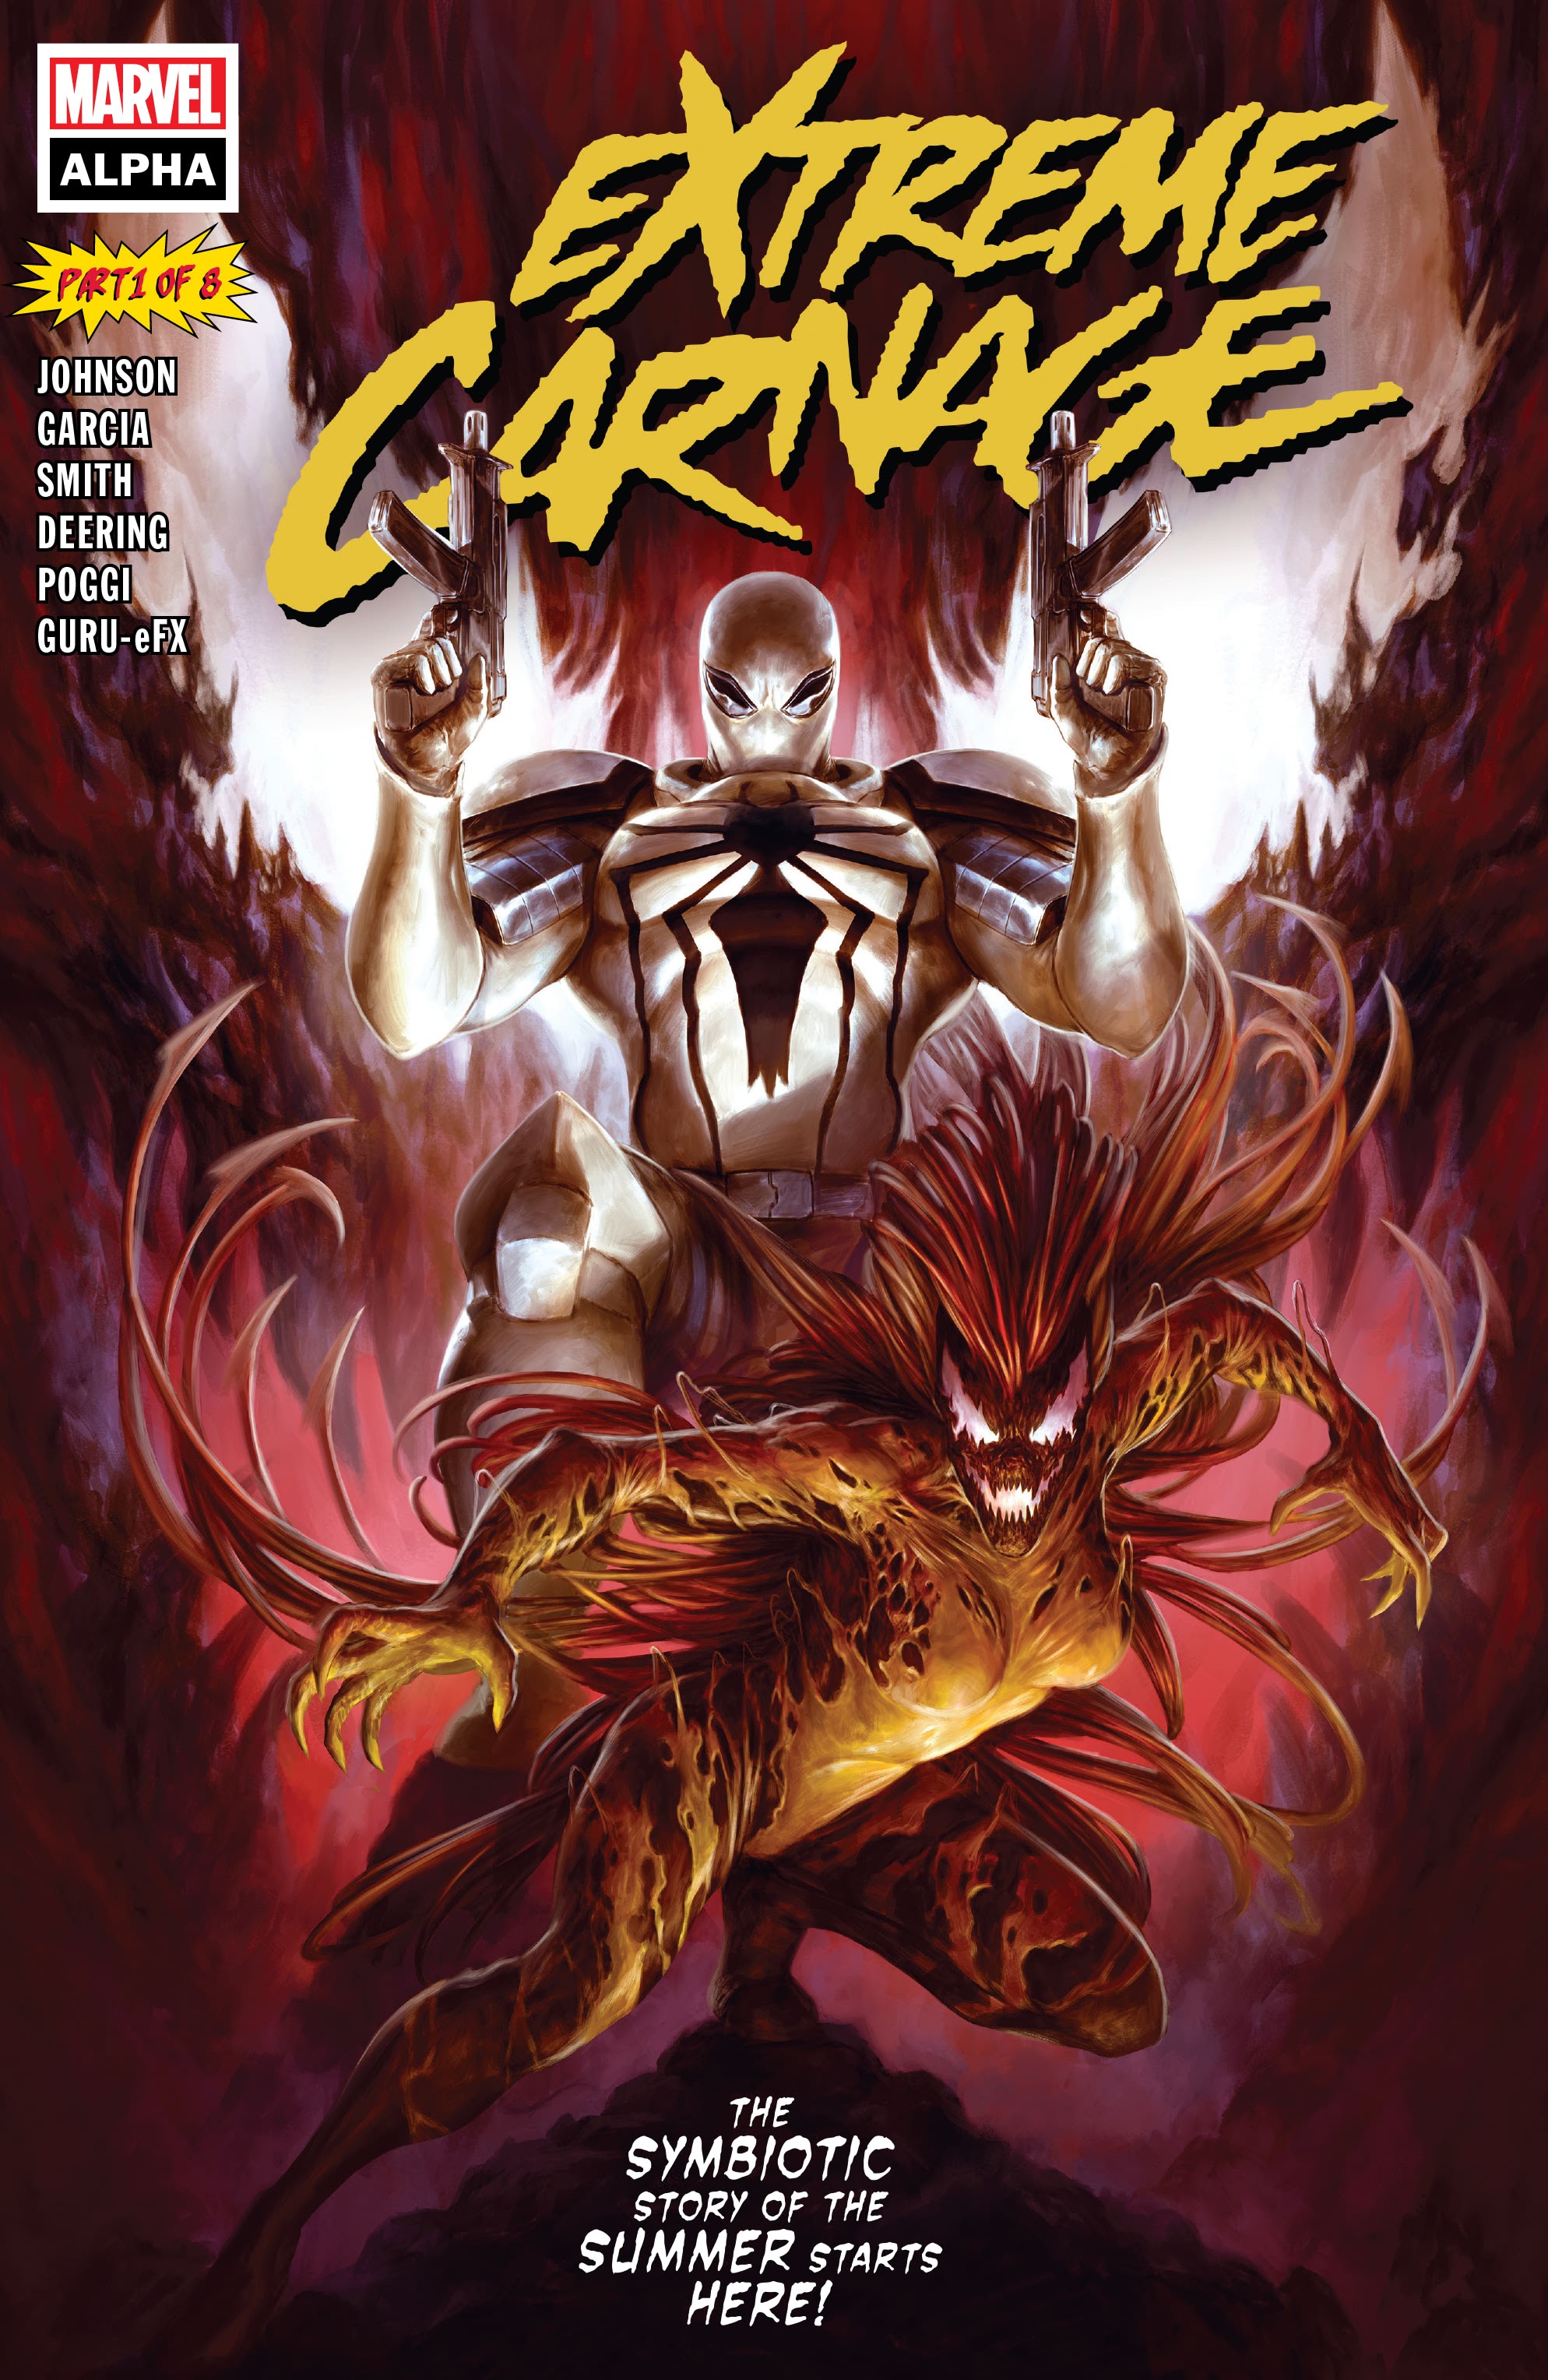 Read online Extreme Carnage comic -  Issue # Alpha - 1